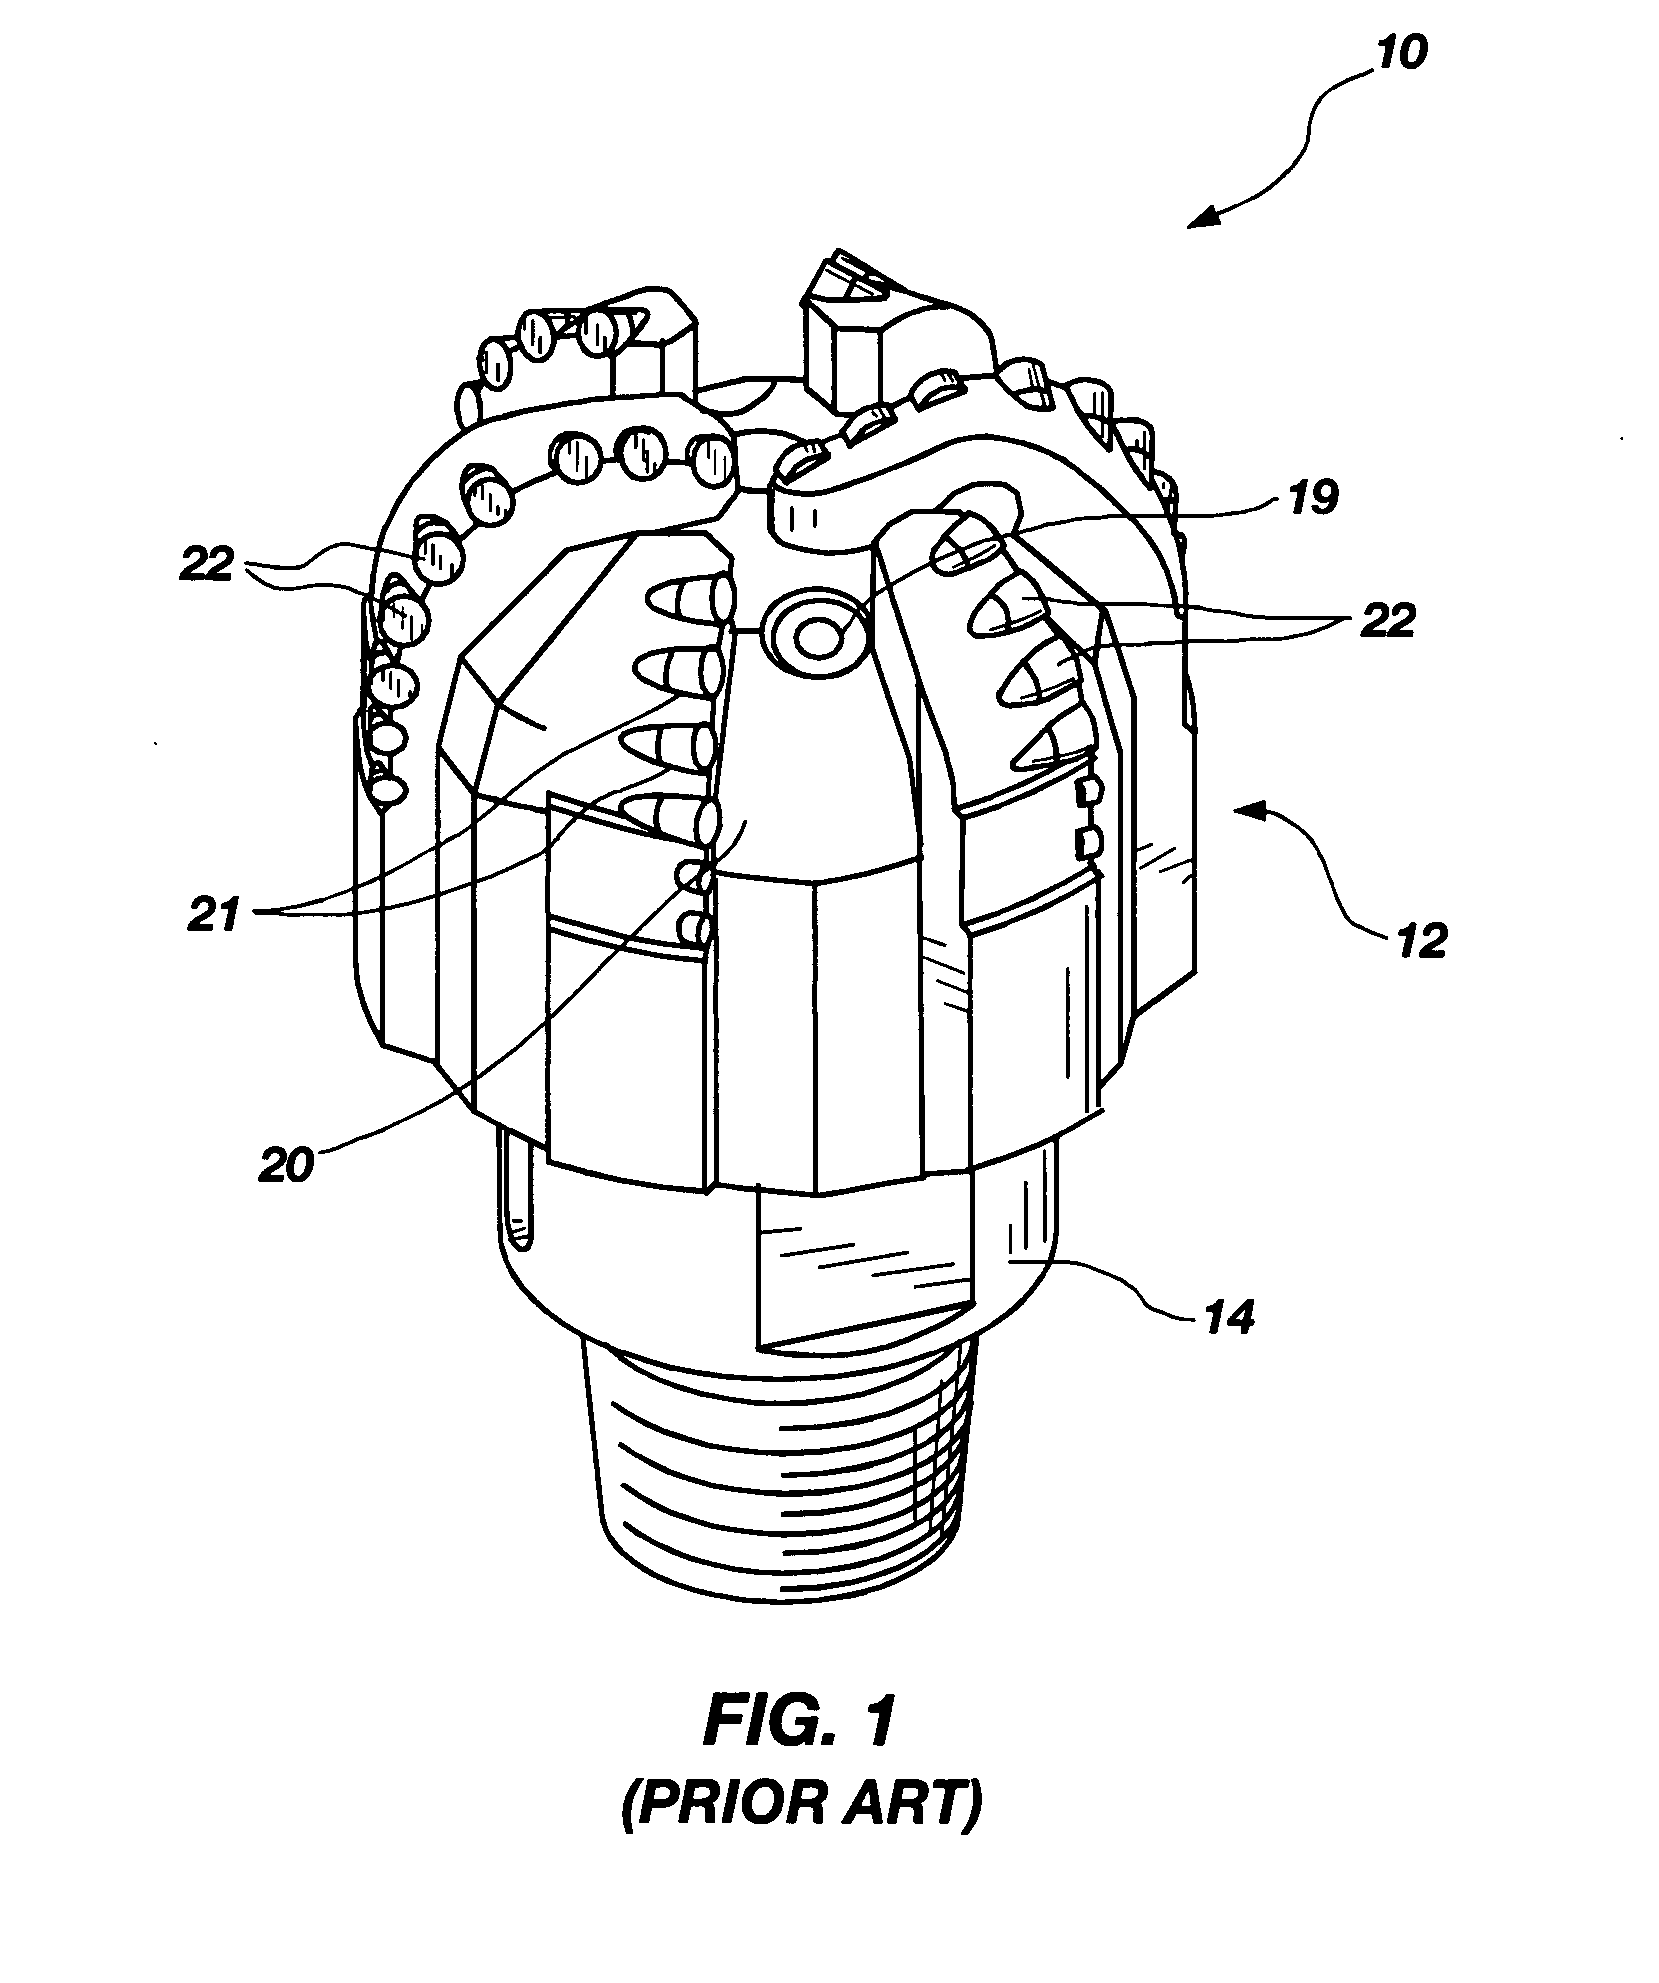 Particle-matrix composite drill bits with hardfacing and methods of manufacturing and repairing such drill bits using hardfacing materials